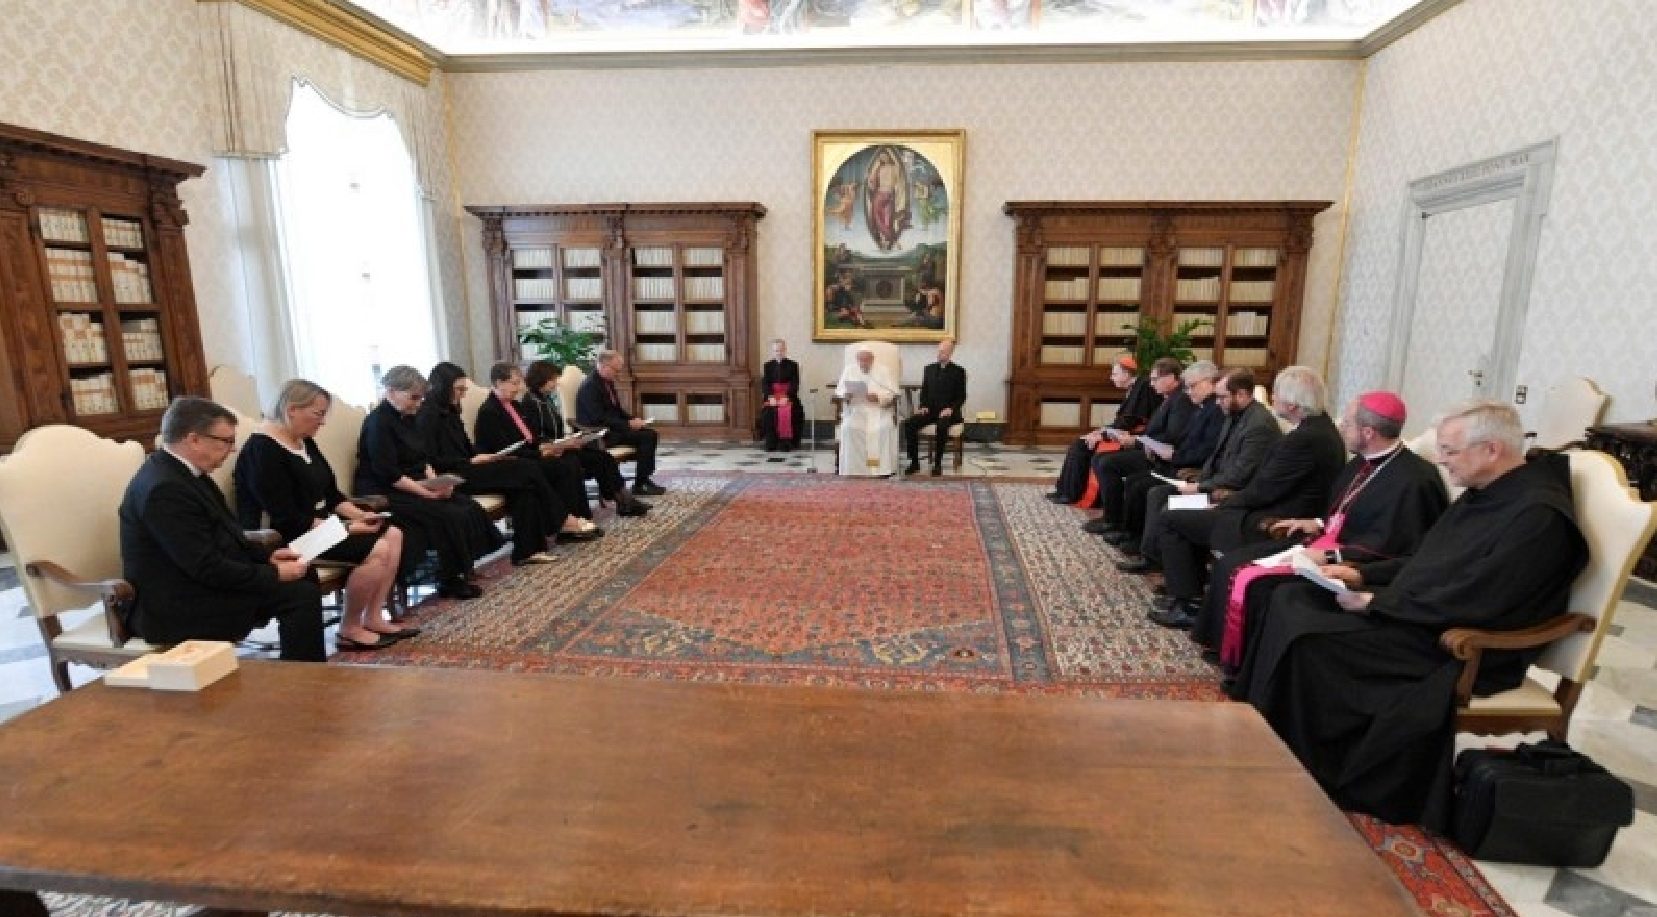 Pope Francis received in audience a delegation from the Lutheran World Federation